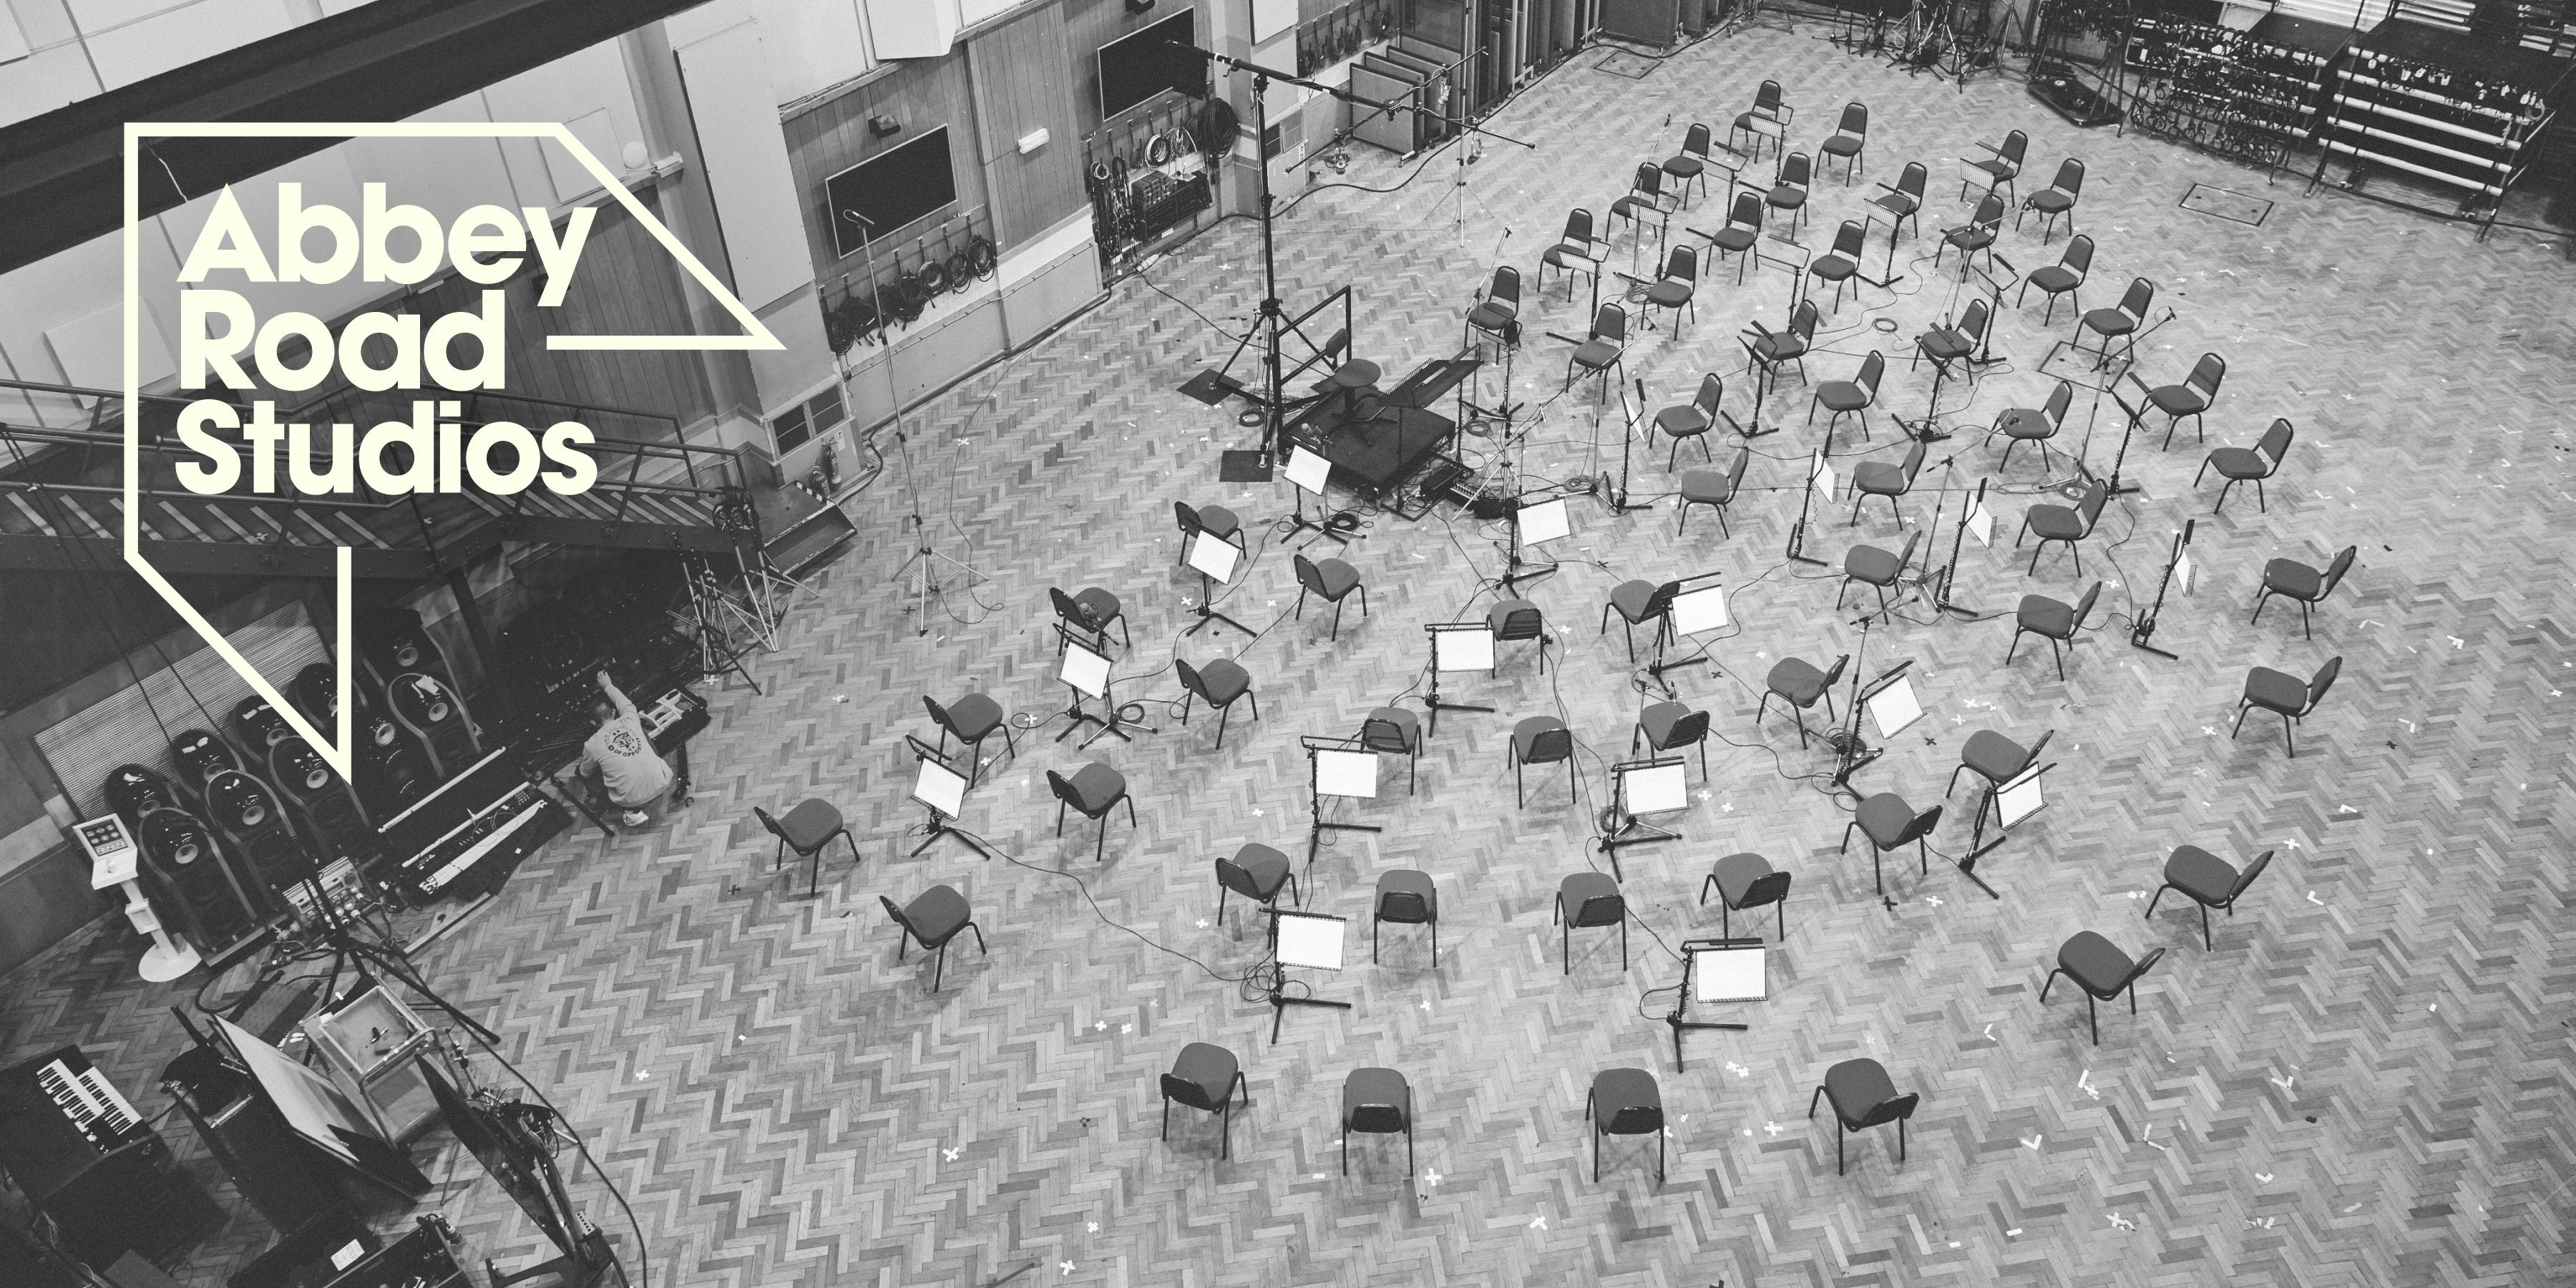 Inside Abbey Road Studios. Overhead view of chairs and microphones set up for an orchestra.